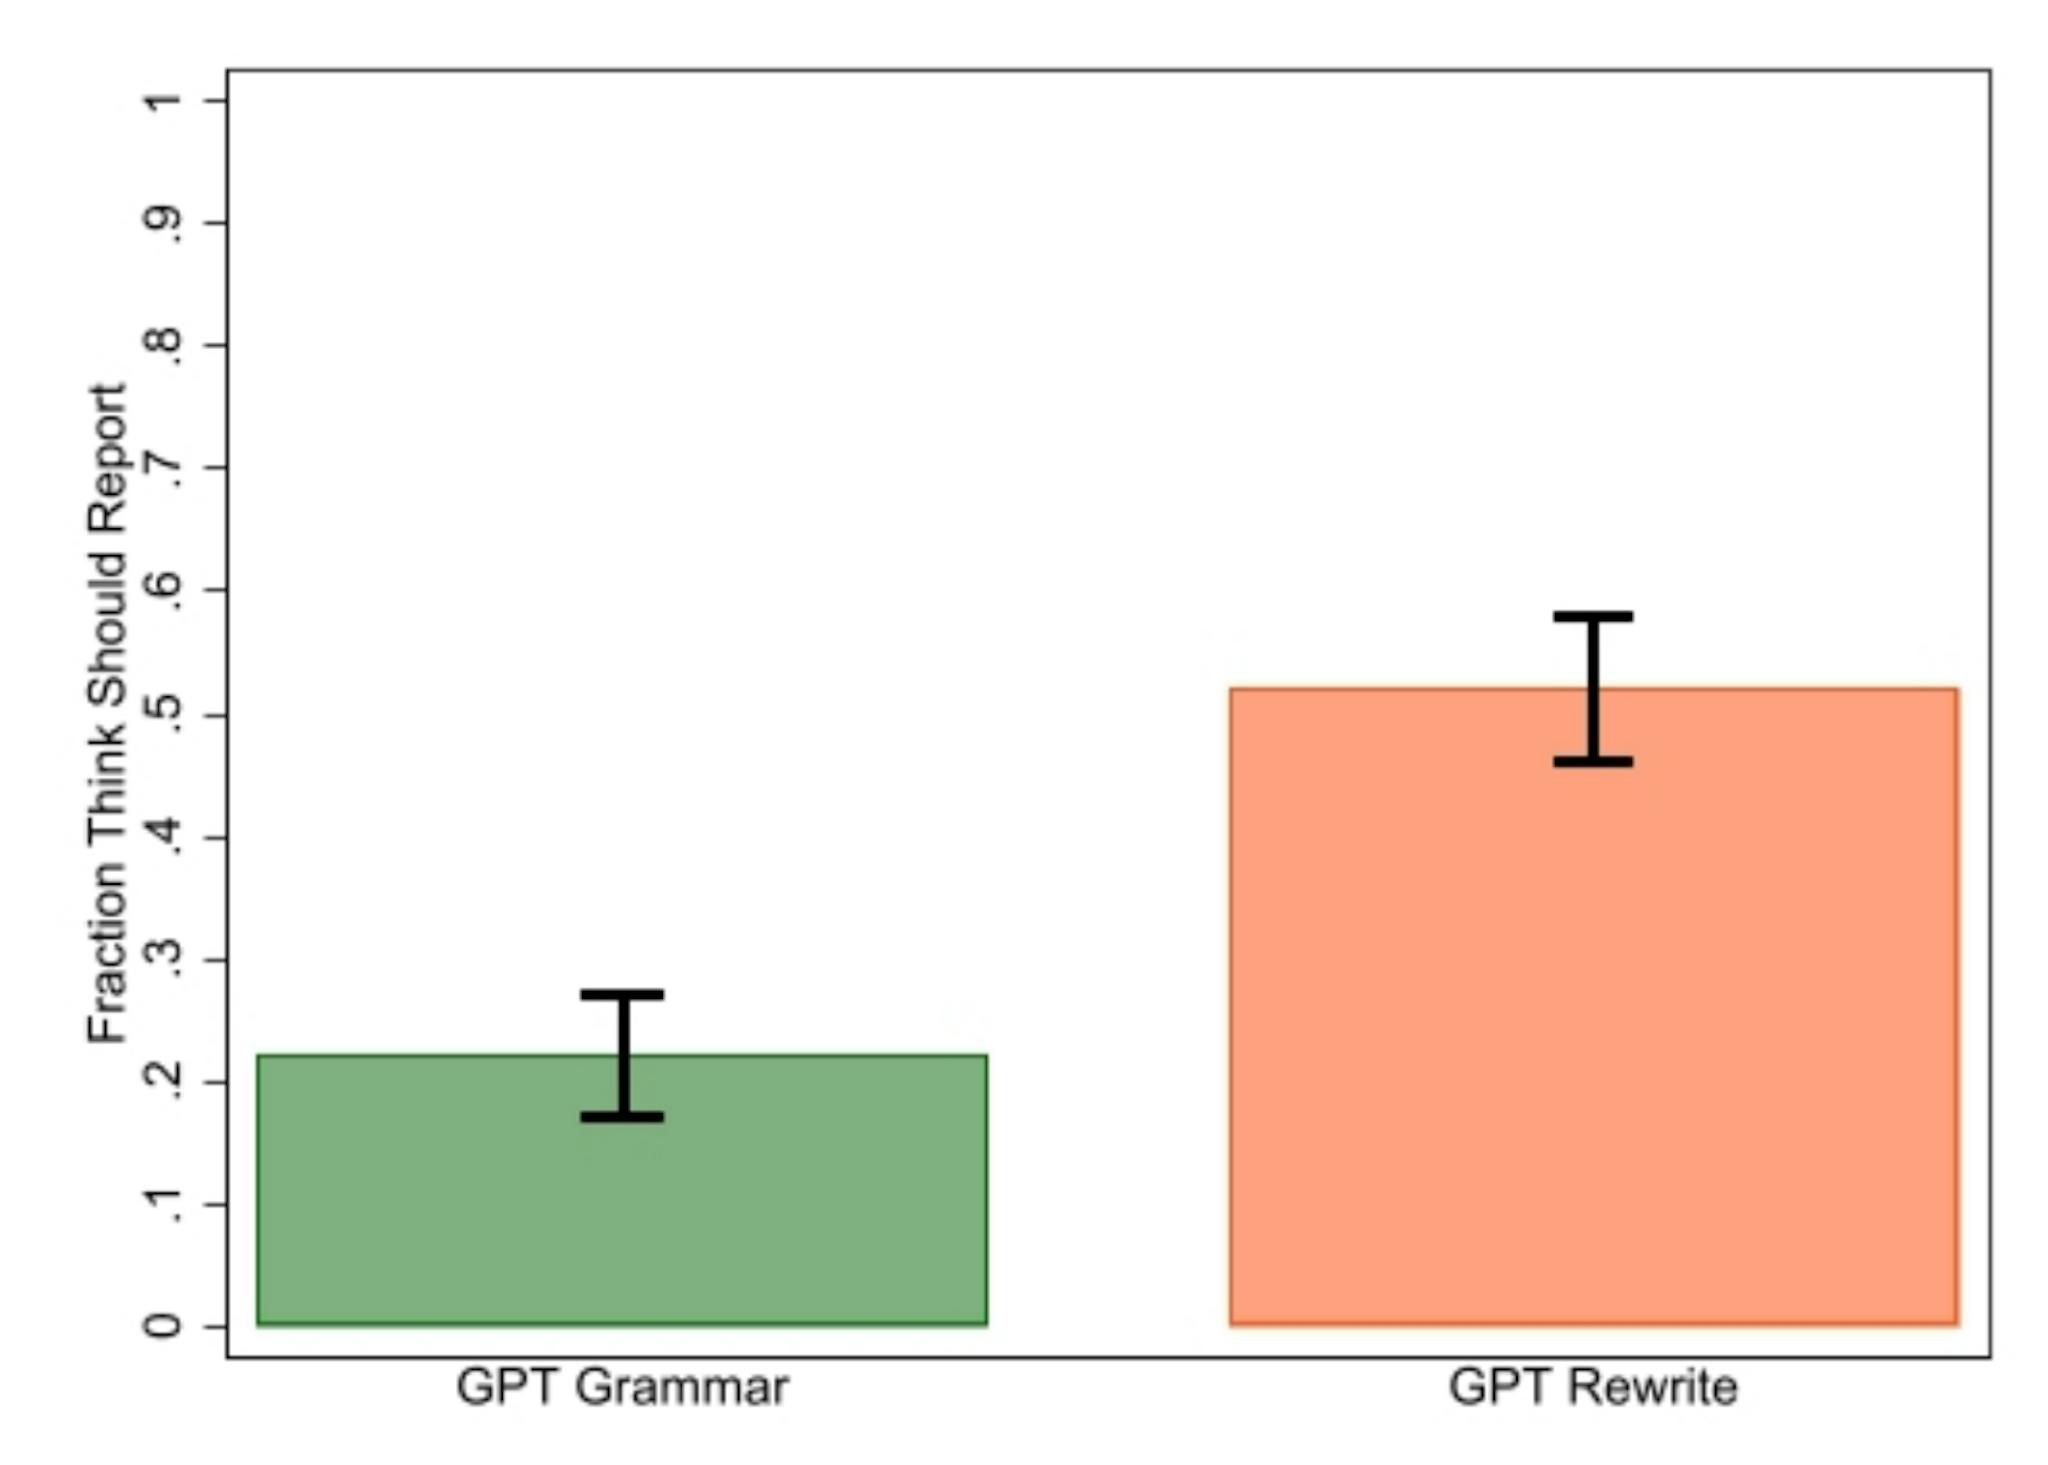 (a) Fraction of survey respondents indicating that ChatGPT use in fixing grammar or rewriting text should be reported, with 95% confidence intervals.